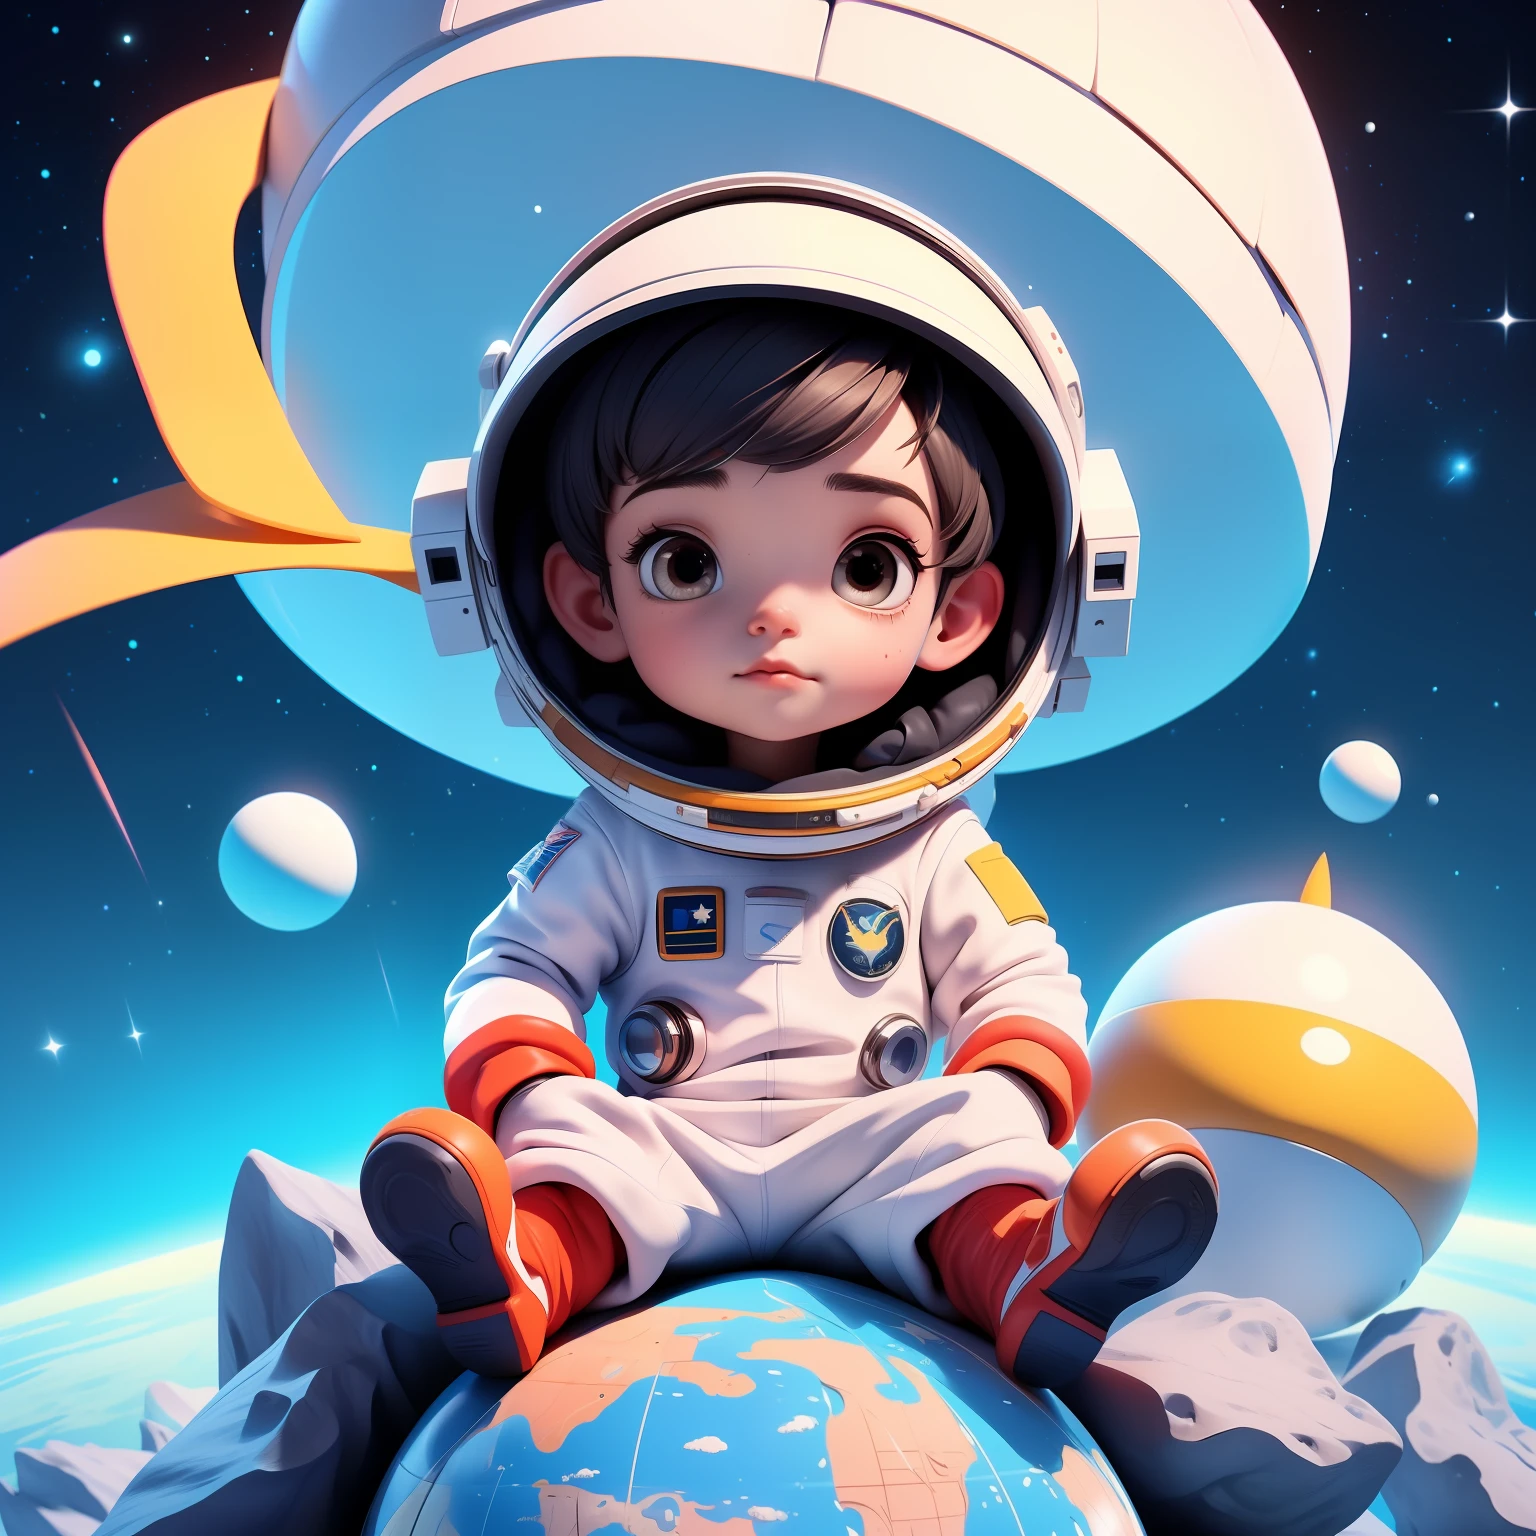 3DCHARACTER, astronaut outfit, (fully body: 1.2), simple background, Masterpiece artwork, best qualityer, (gradient background: 1.1), 1 men, Draw a 6 year old boy with brown skin, and black eyes programmer, Sitting on a research platform floating in the middle of an asteroid belt watching the planet Earth